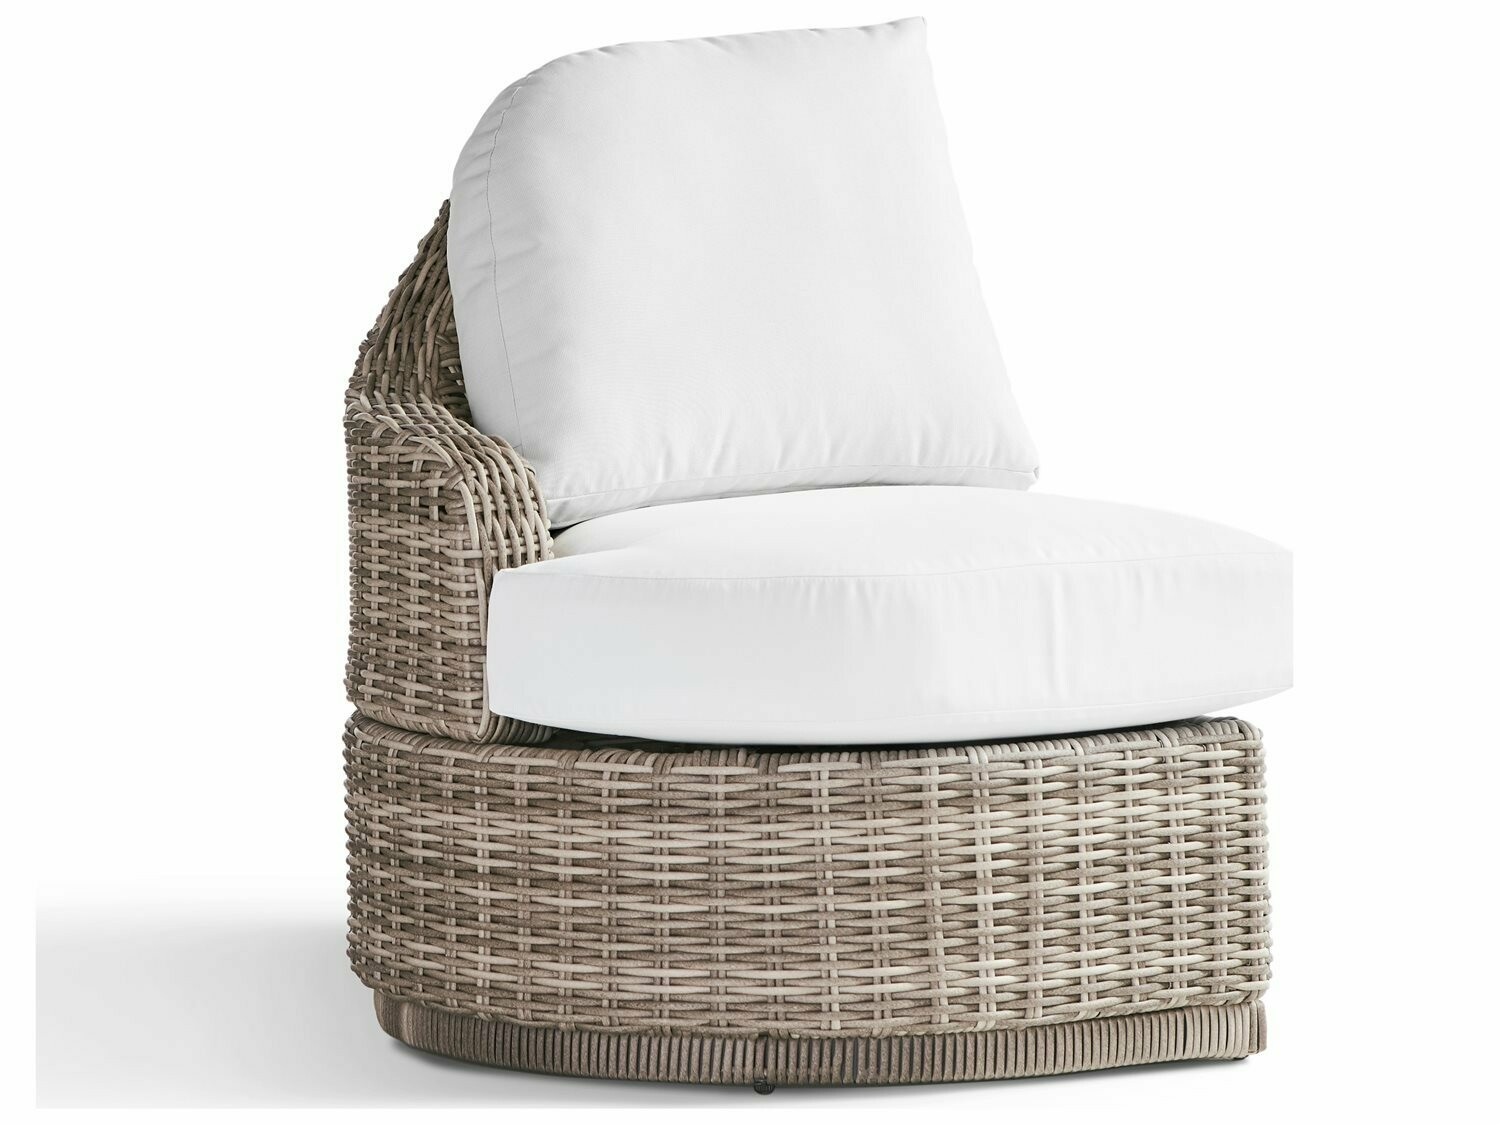 South Sea Rattan South Sea Rattan Luna Cove Wicker Left Side Facing Lounge Chair - Fitted